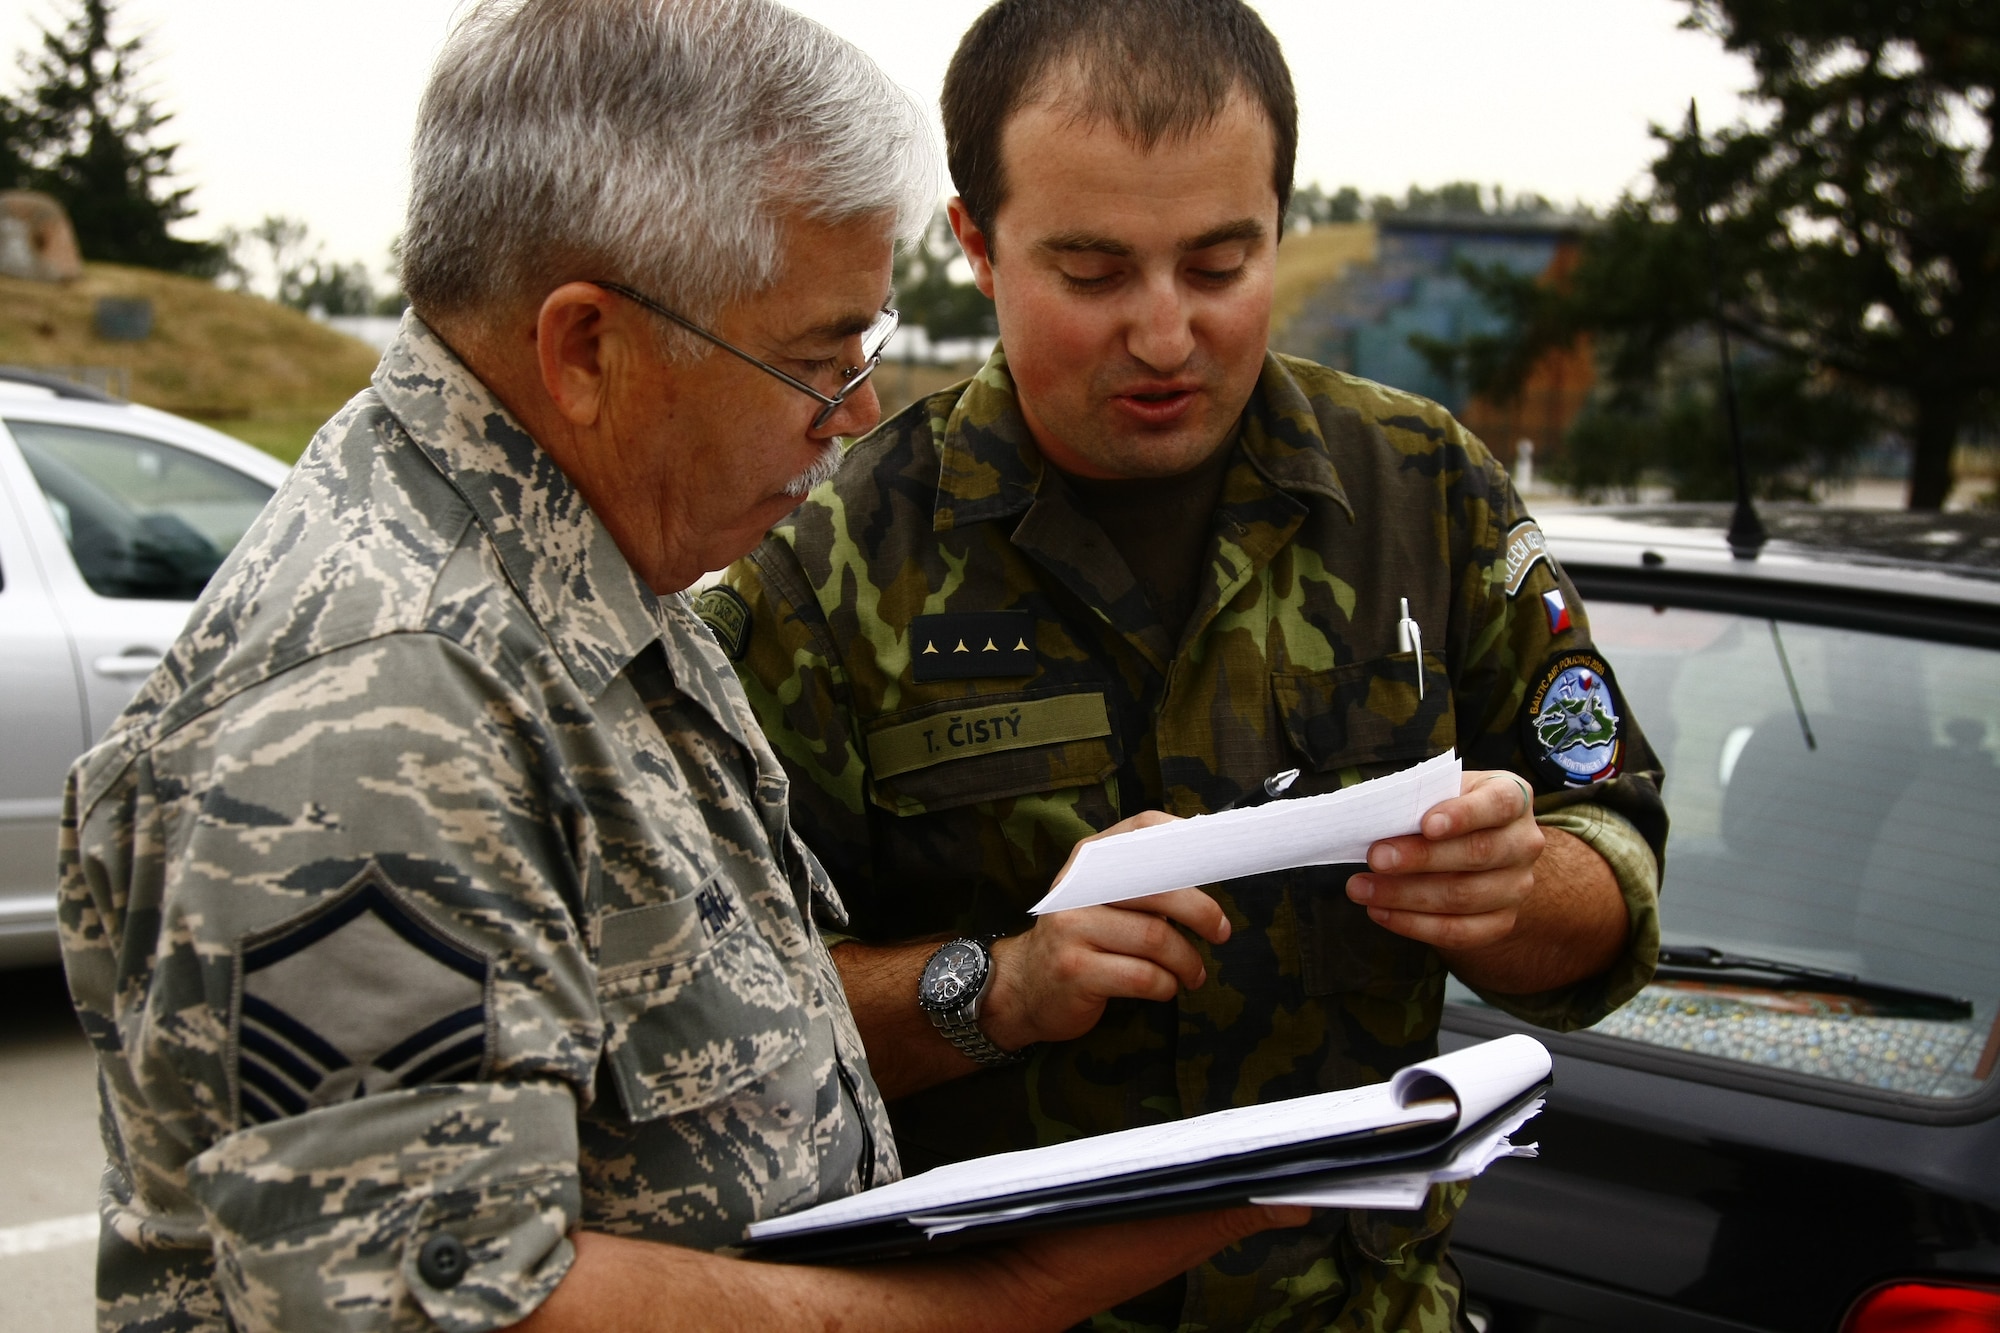 Contracting specialist Master Sgt Robert Pena works side-by-side with his Czech counterpart on purchasing issues.  Members of the Texas Air National Guard’s 149th Fighter Wing were in the Czech Republic conducting mutual training as part of the National Guard’s state partnership program.  (U.S. Air Force photo by Senior Master Sgt Miguel Arellano)